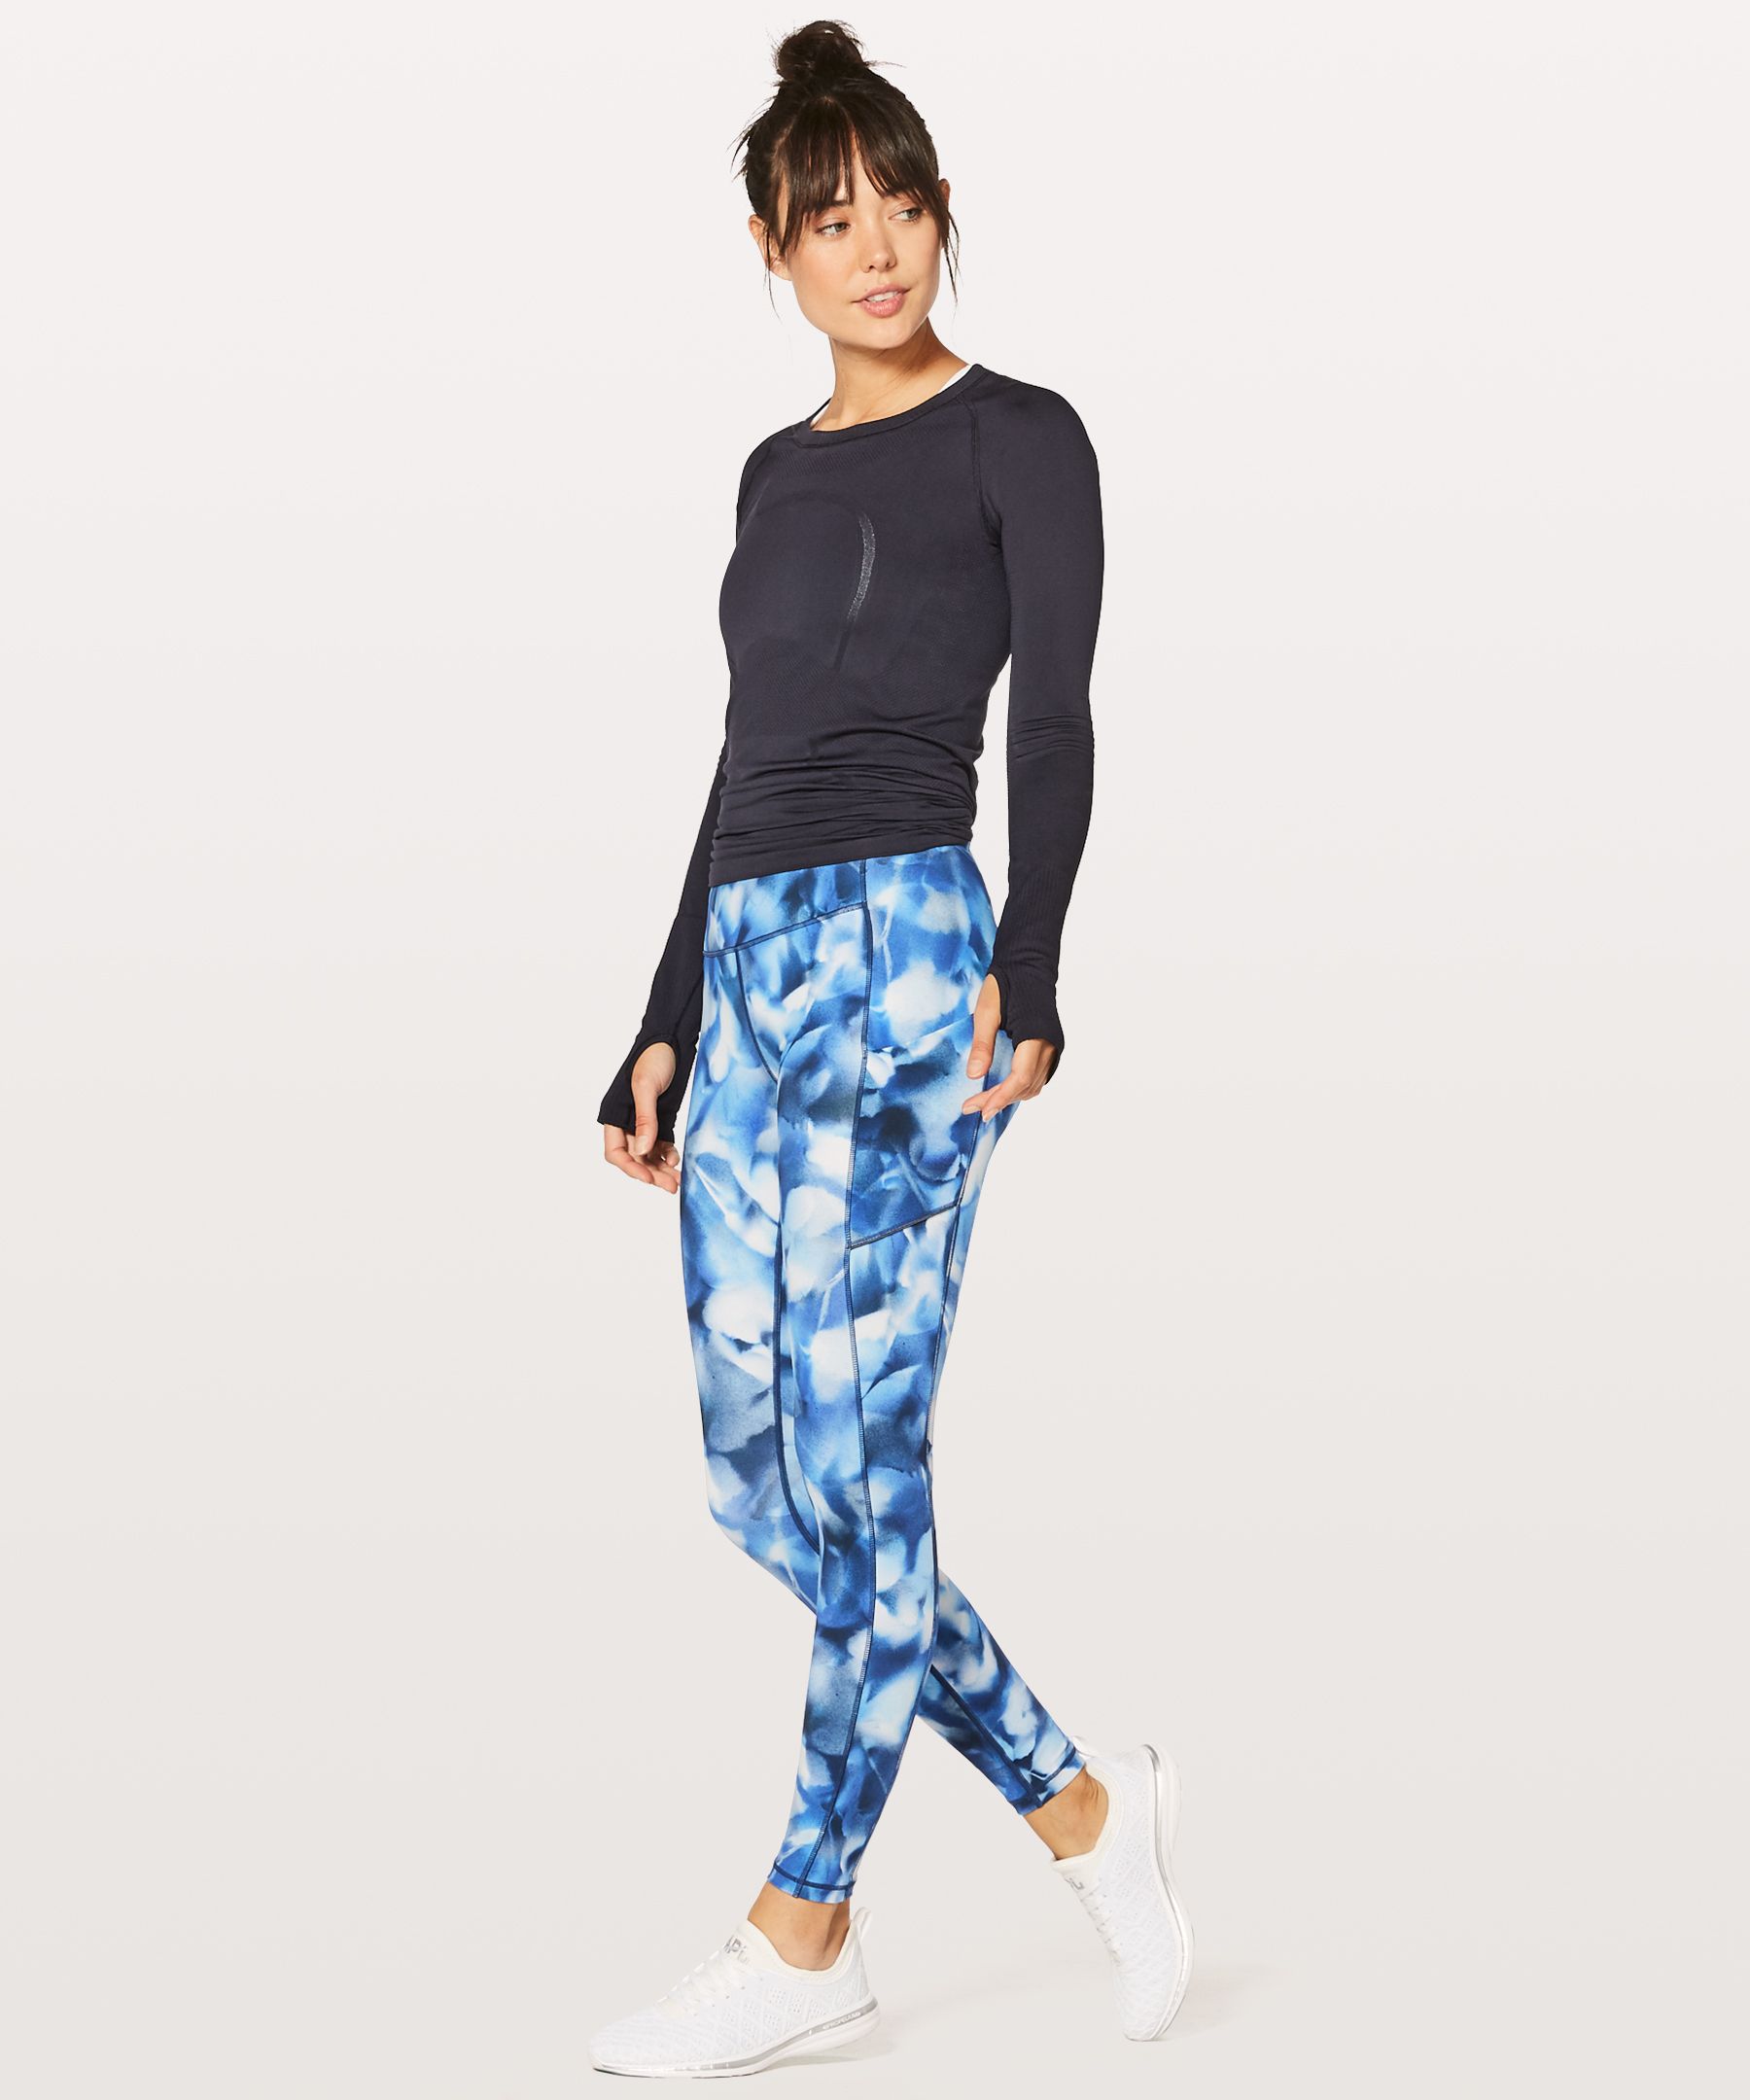 Lululemon Speed Up Tight *Full-On Luxtreme 28 - Black (First